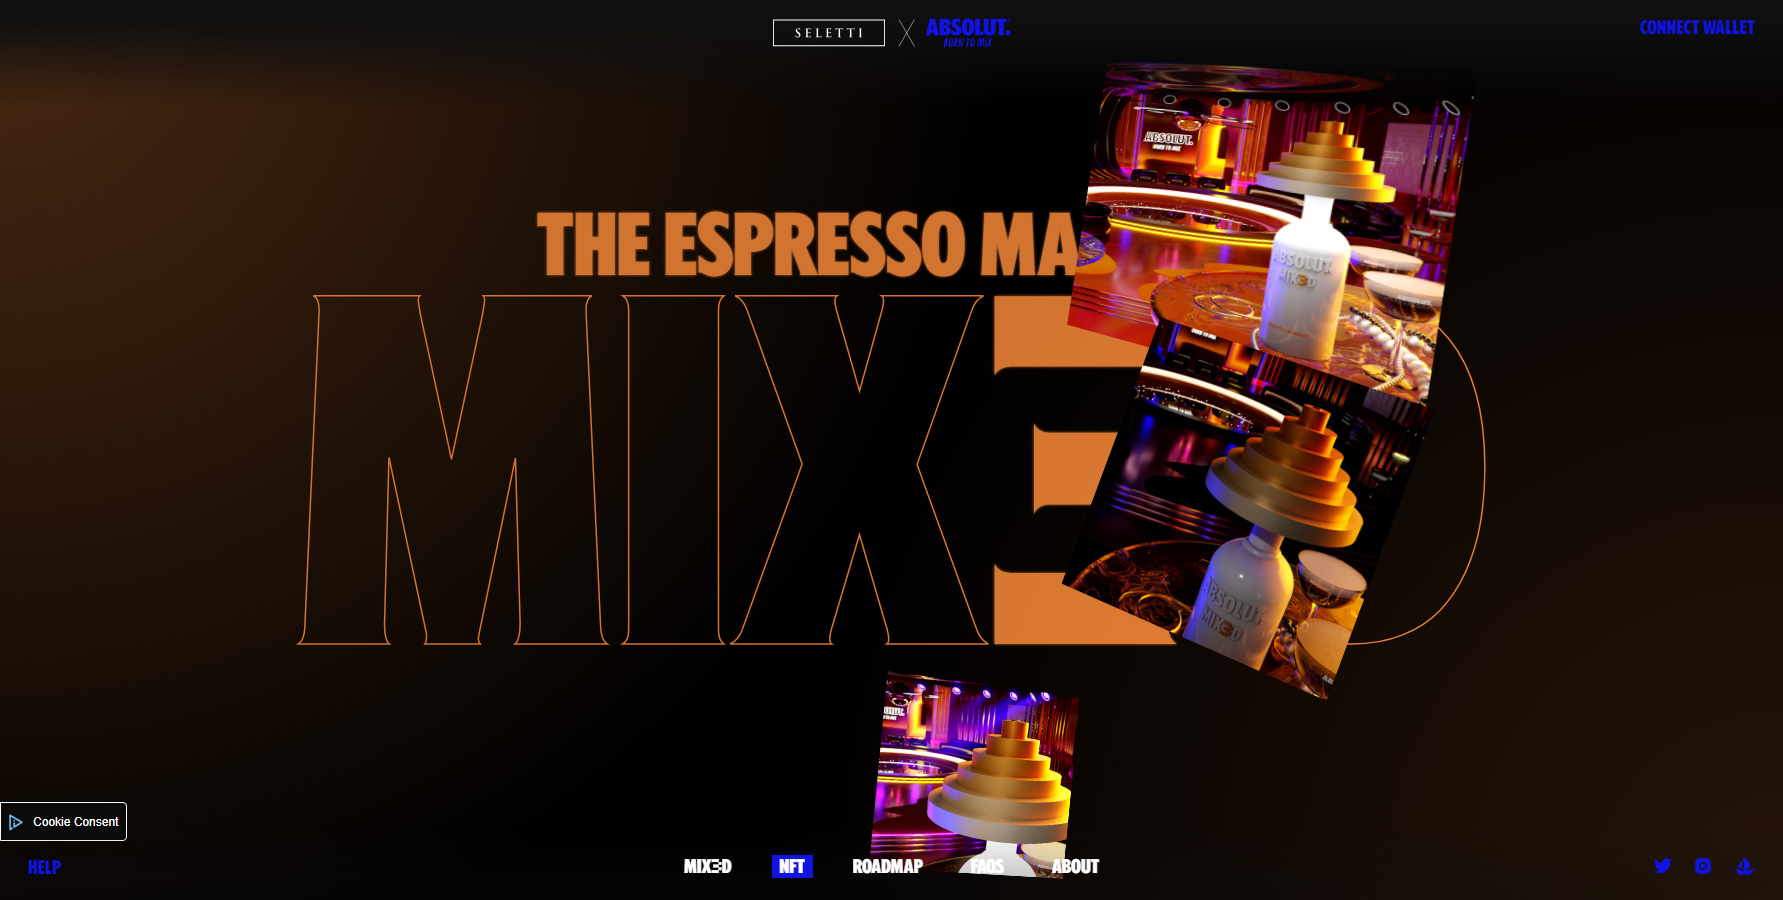 Seletti X Absolut Born to Mix - Website of the Day